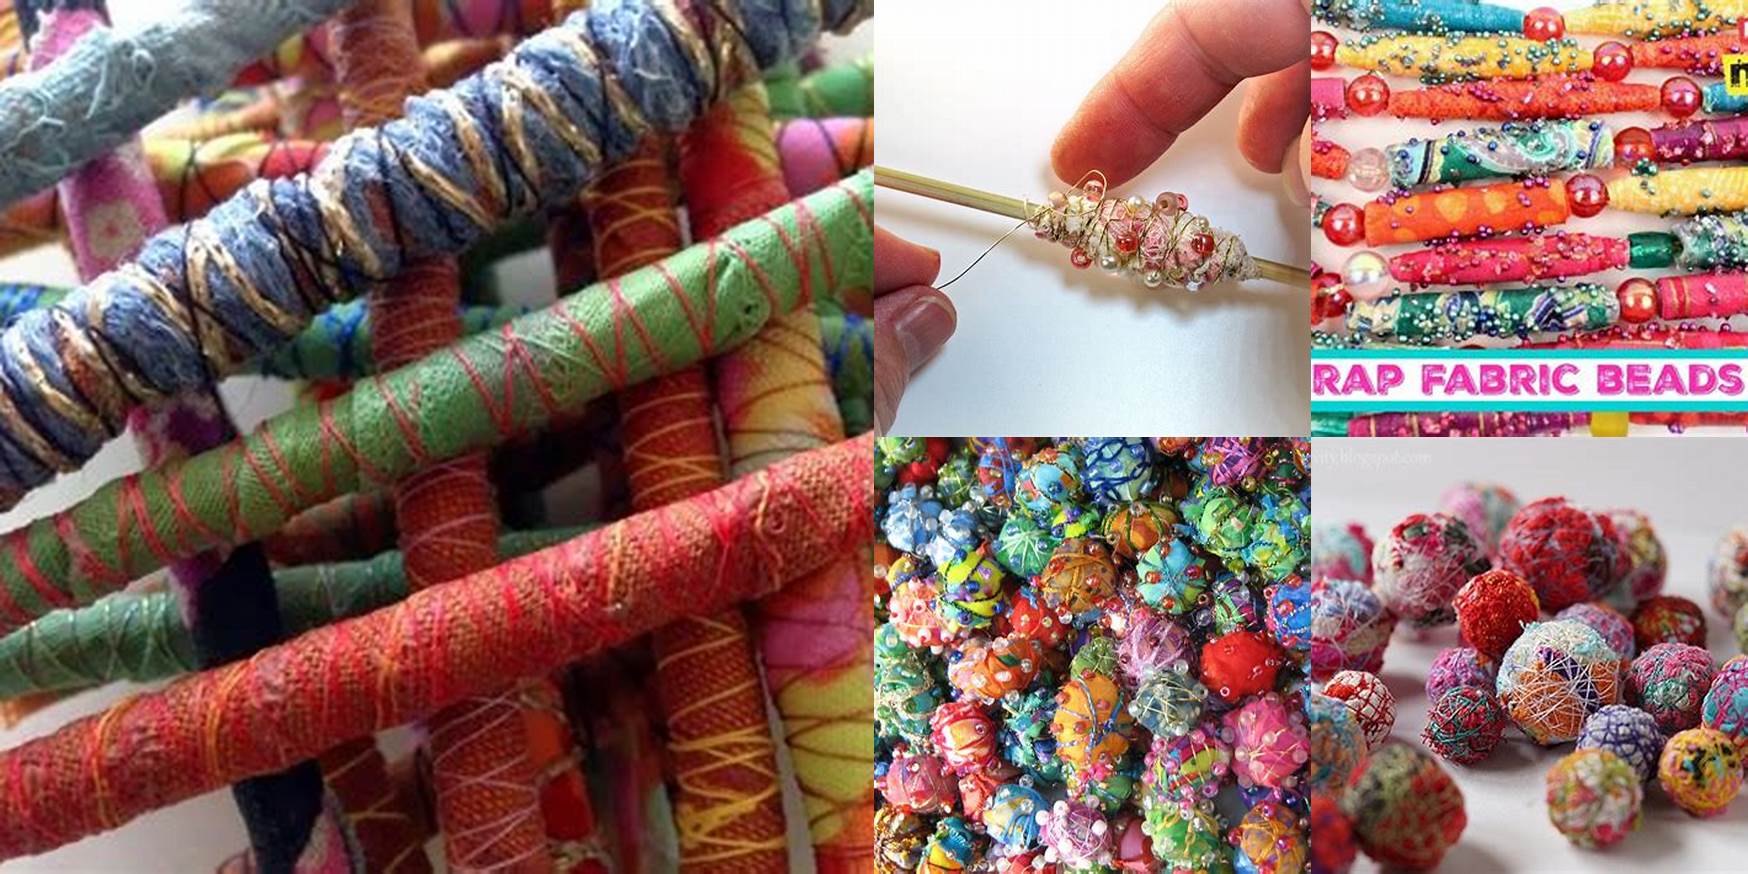 How To Make Beads From Fabric